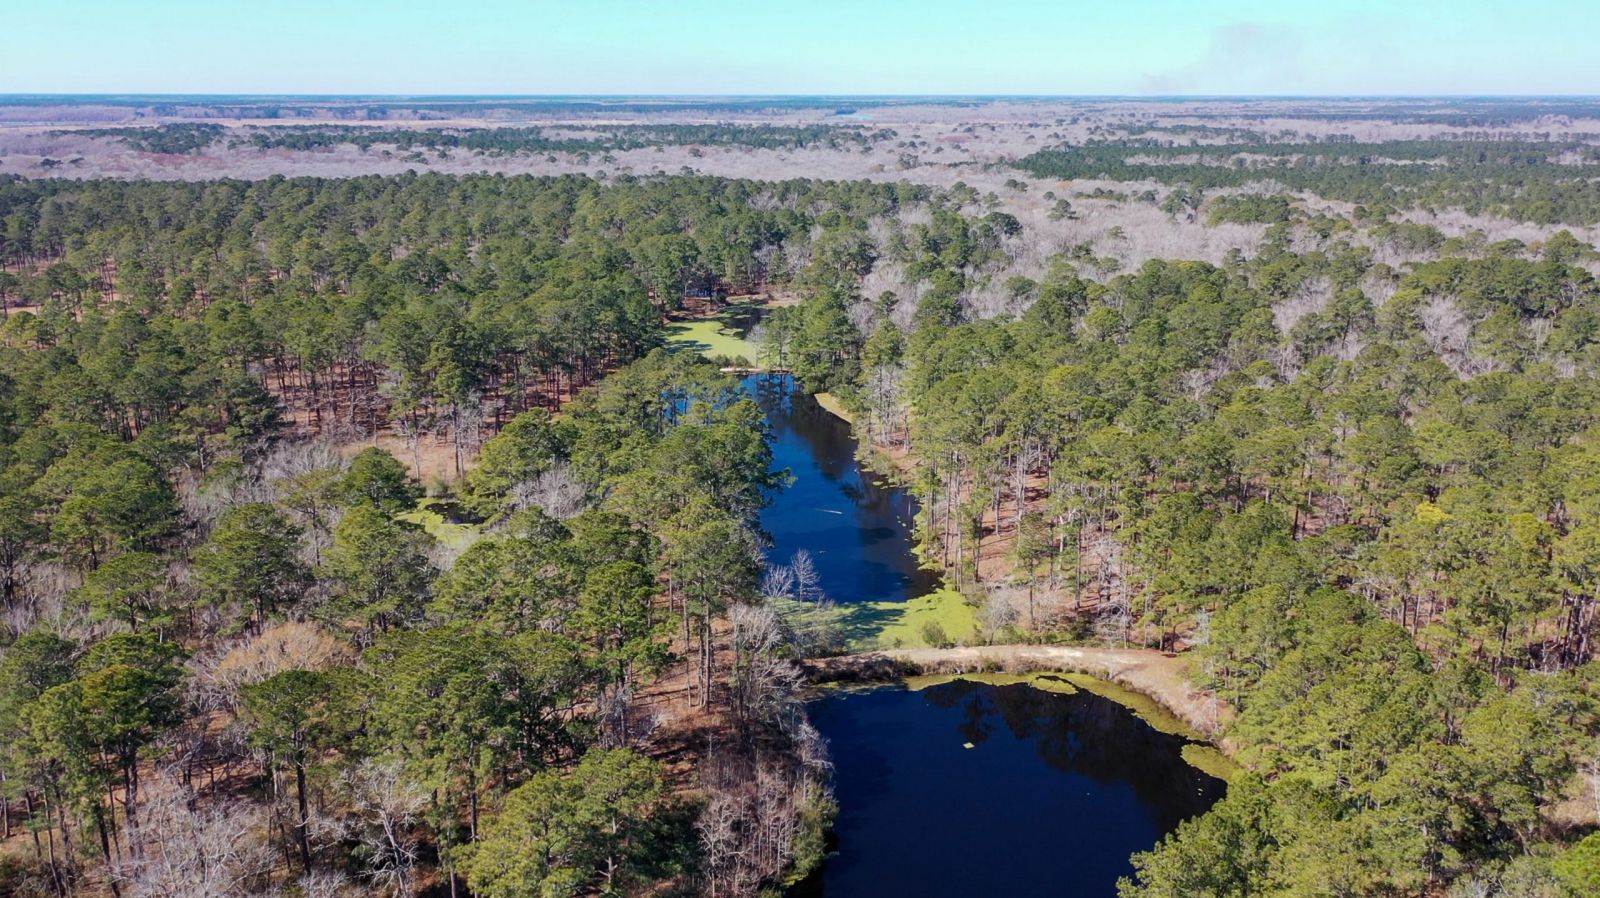 The Willtown tract of land has been recently listed for $13.5 million. (Photo/Provided)